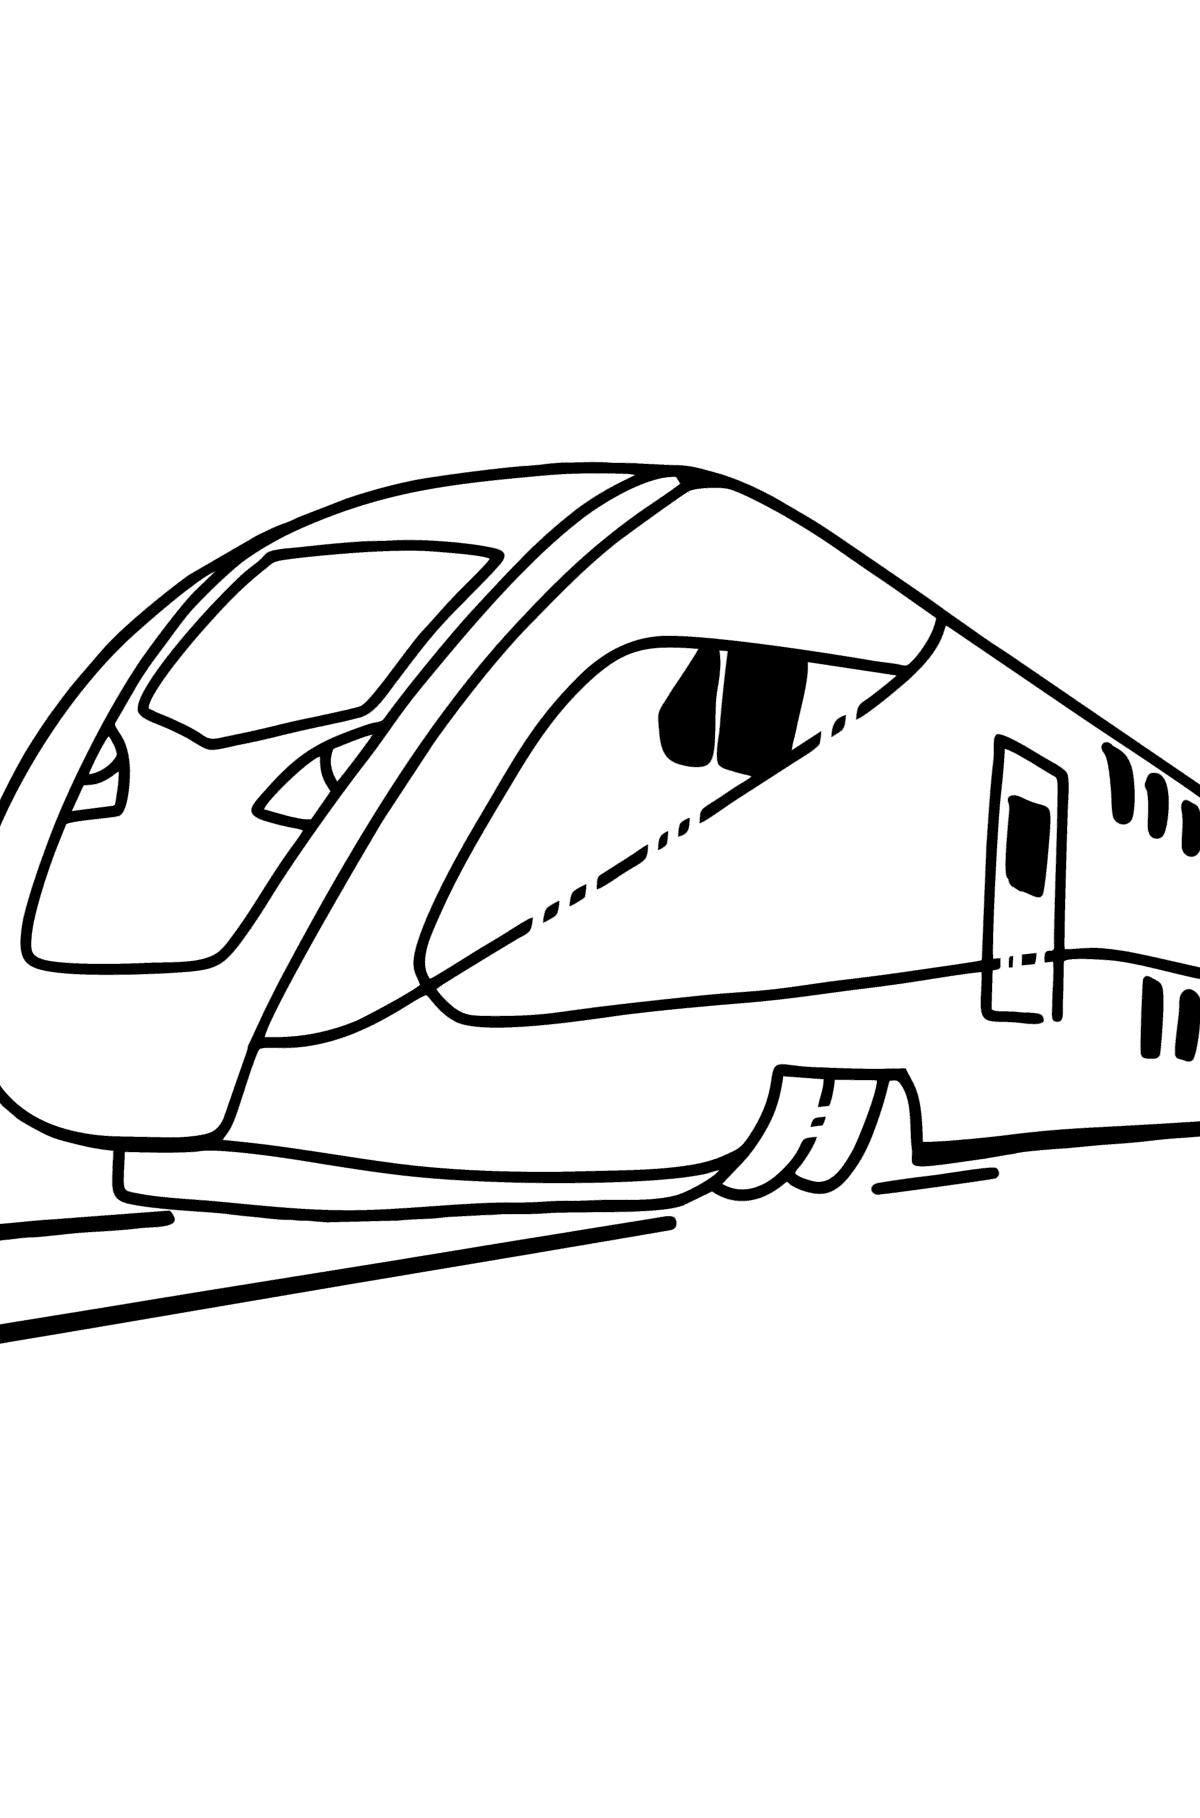 Train coloring page for children - Coloring Pages for Kids